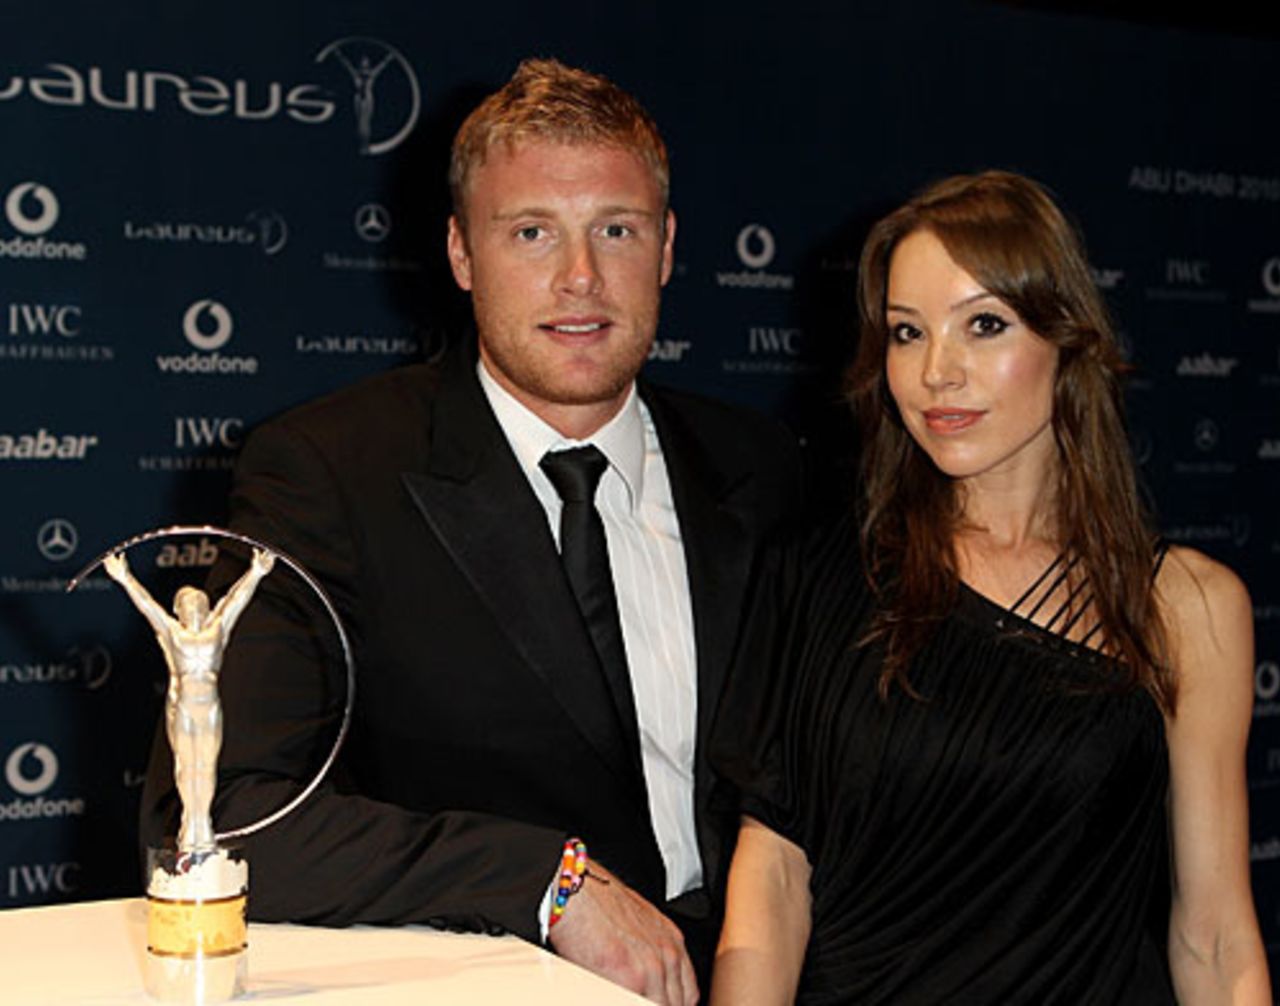 Andrew Flintoff and his wife Rachel attend the Laureus Sports Awards 2010, March 10, 2010